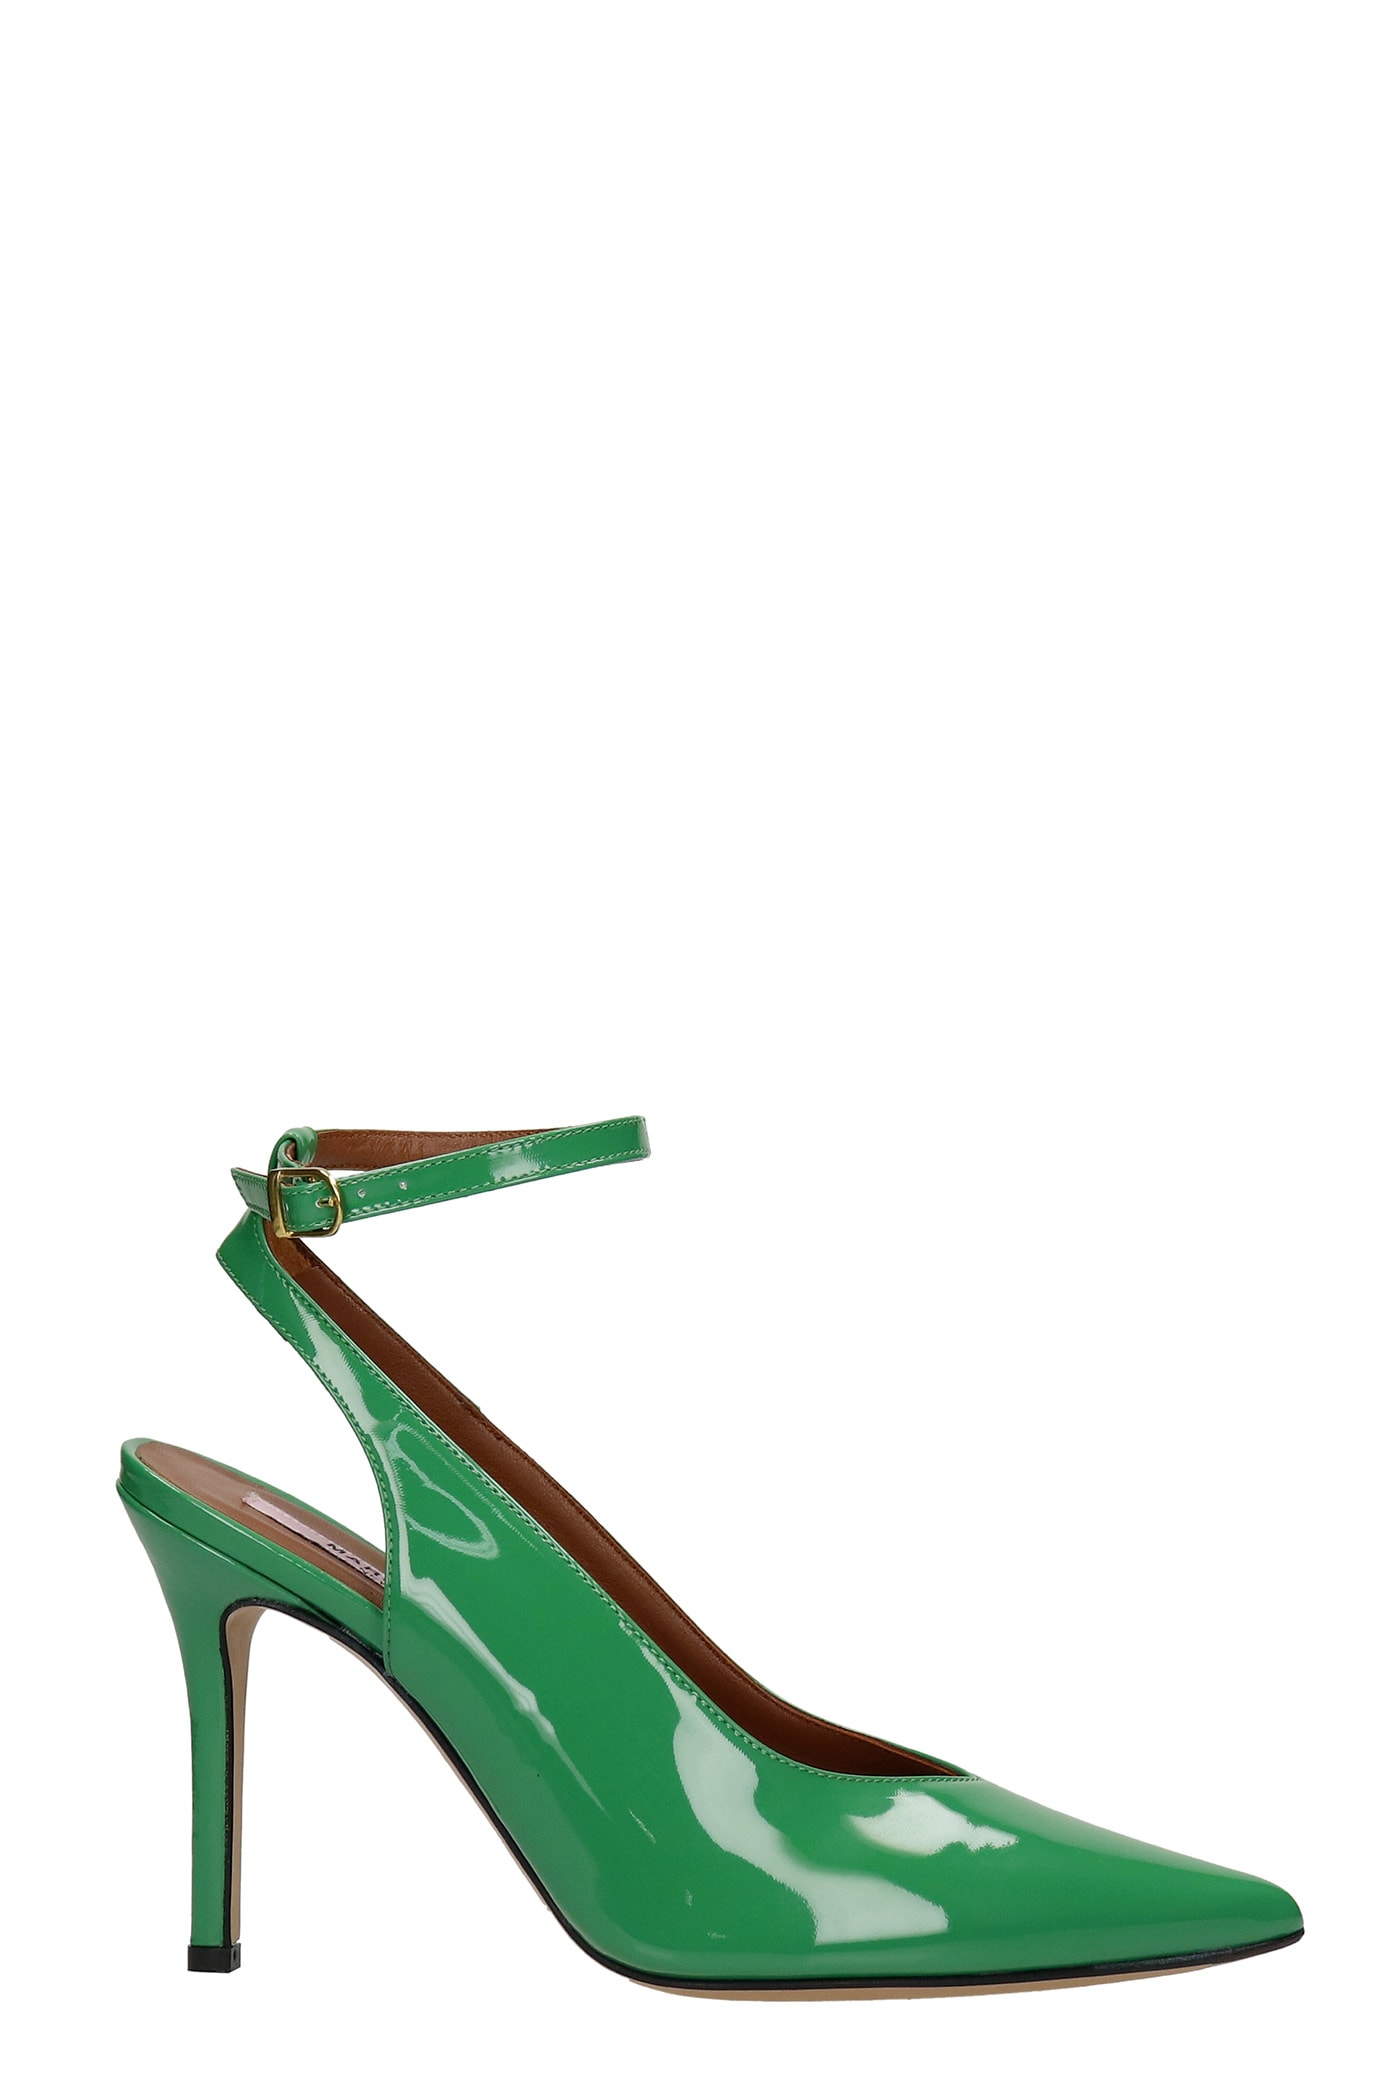 Marc Ellis Mabel Pumps In Green Patent Leather